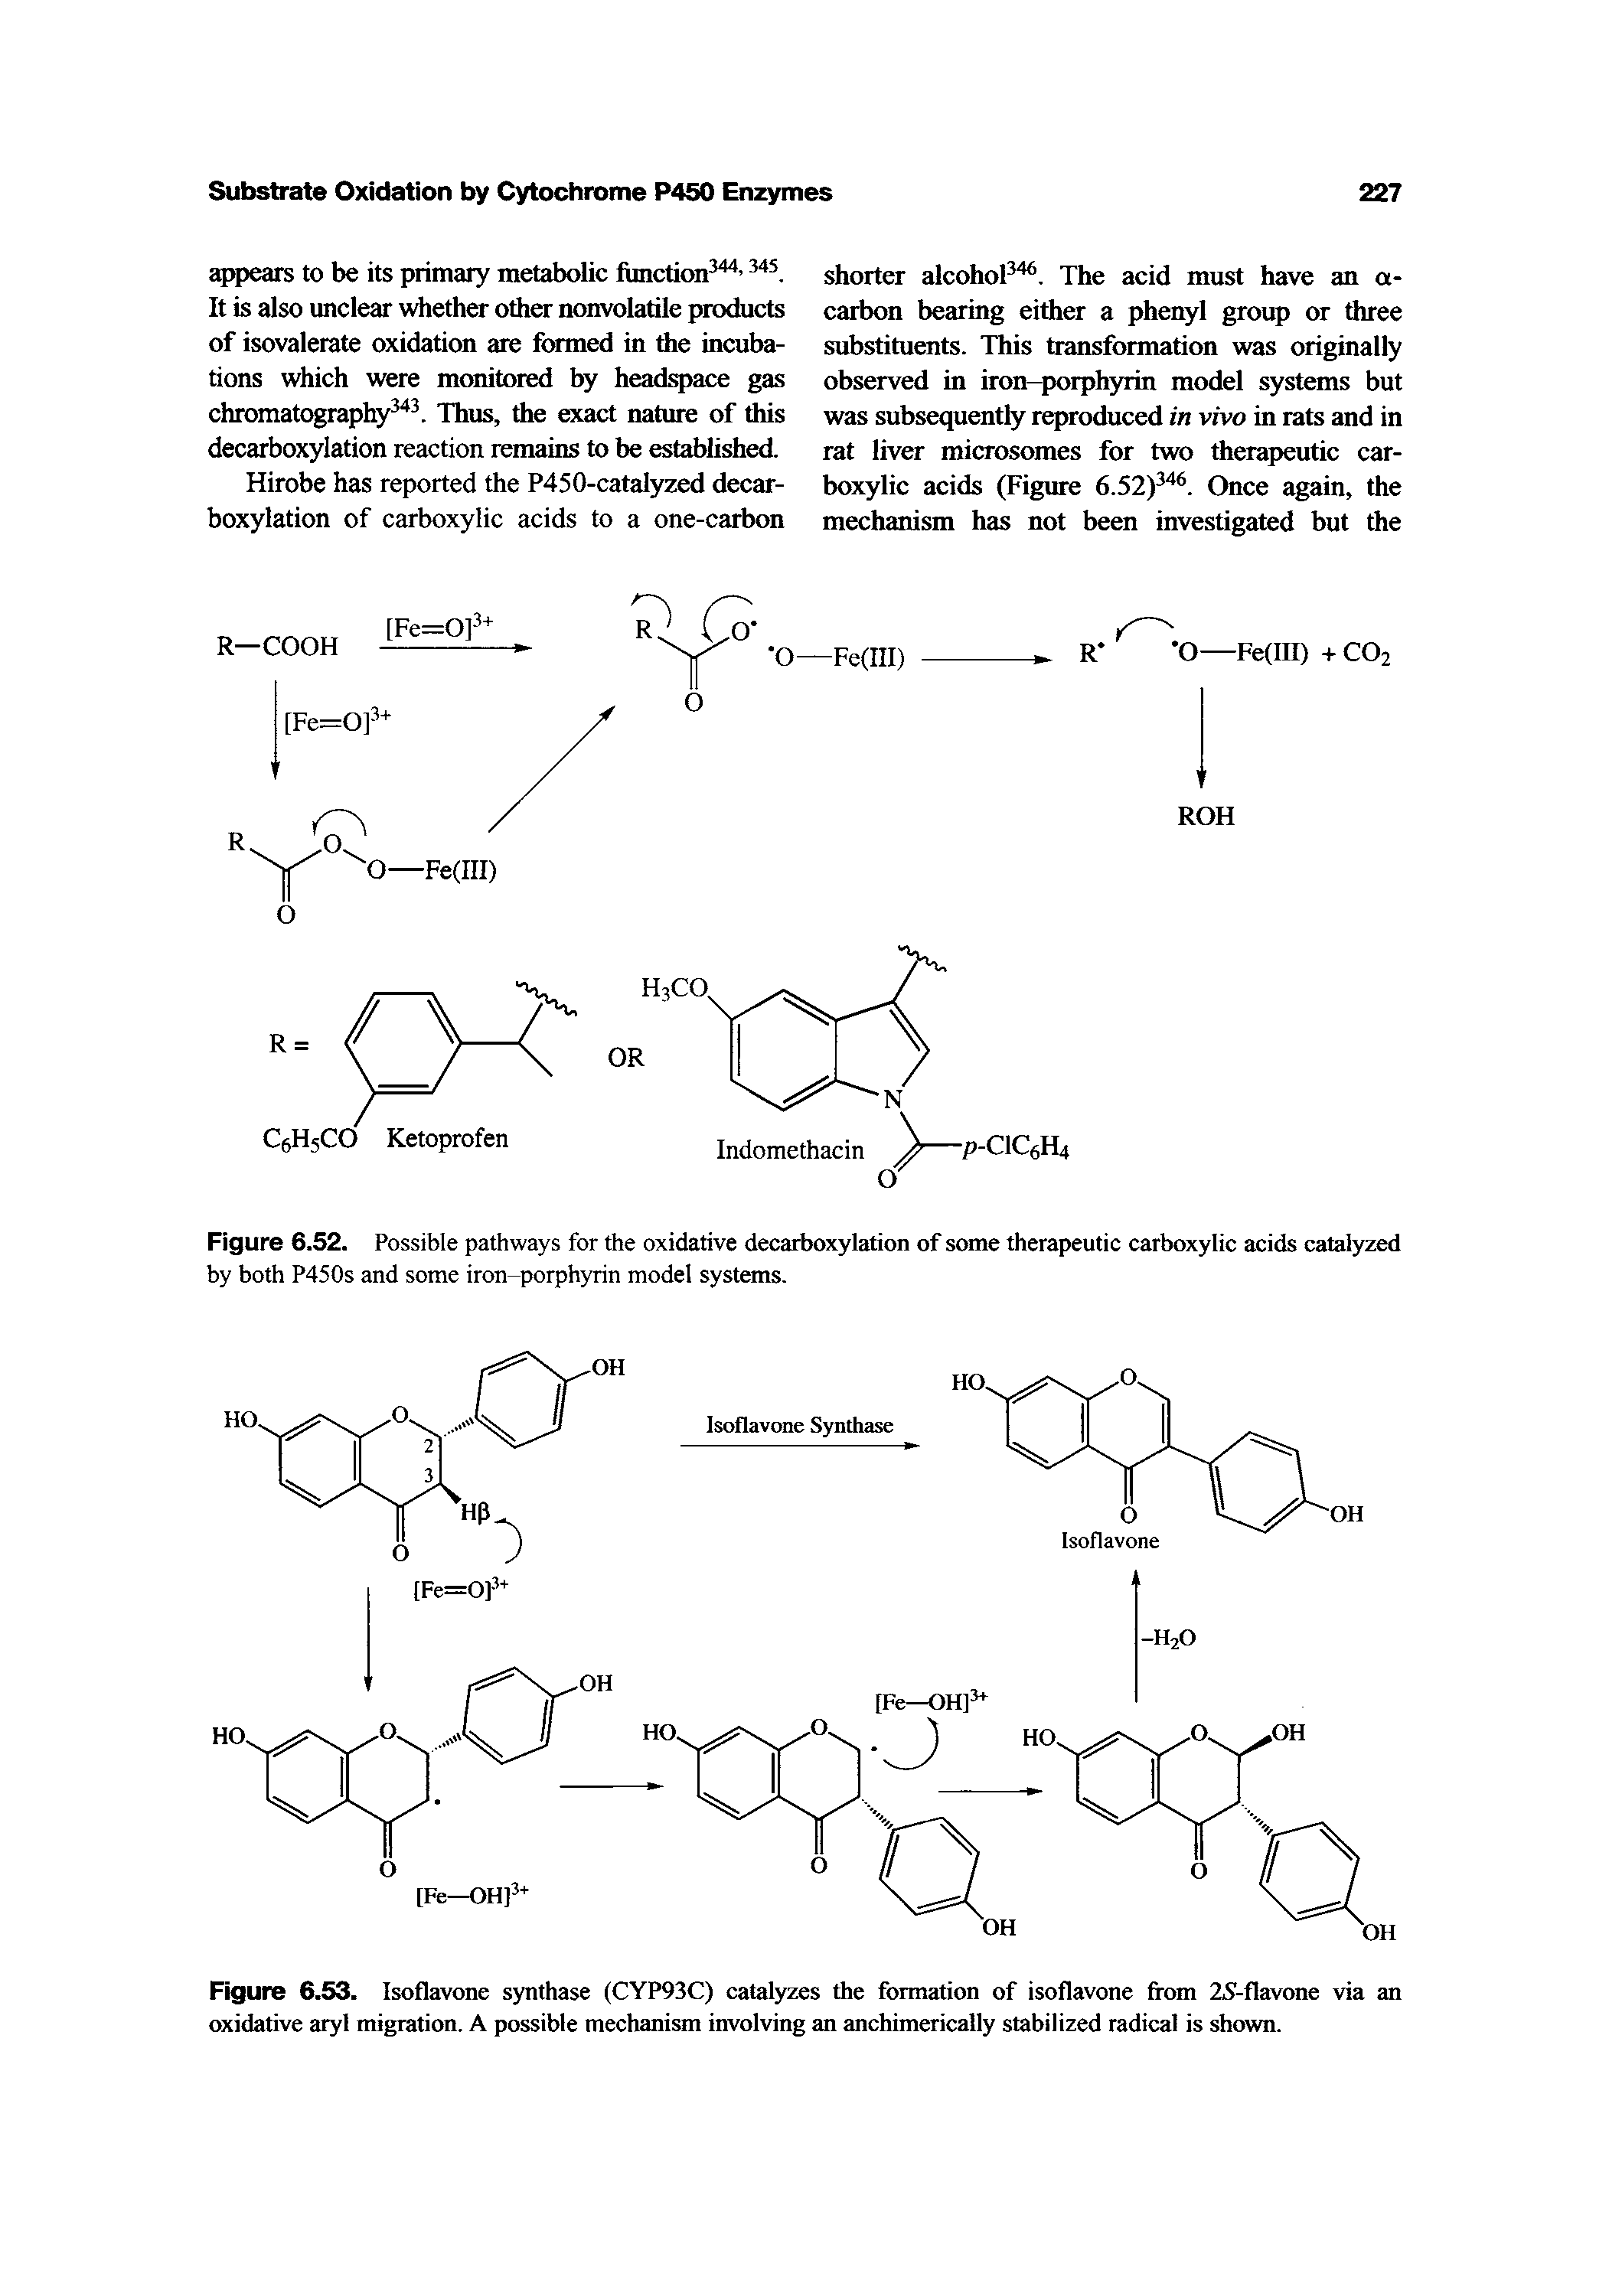 Figure 6.52. Possible pathways for the oxidative decarboxylation of some therapeutic carboxylic acids catalyzed by both P450s and some iron-porphyrin model systems.